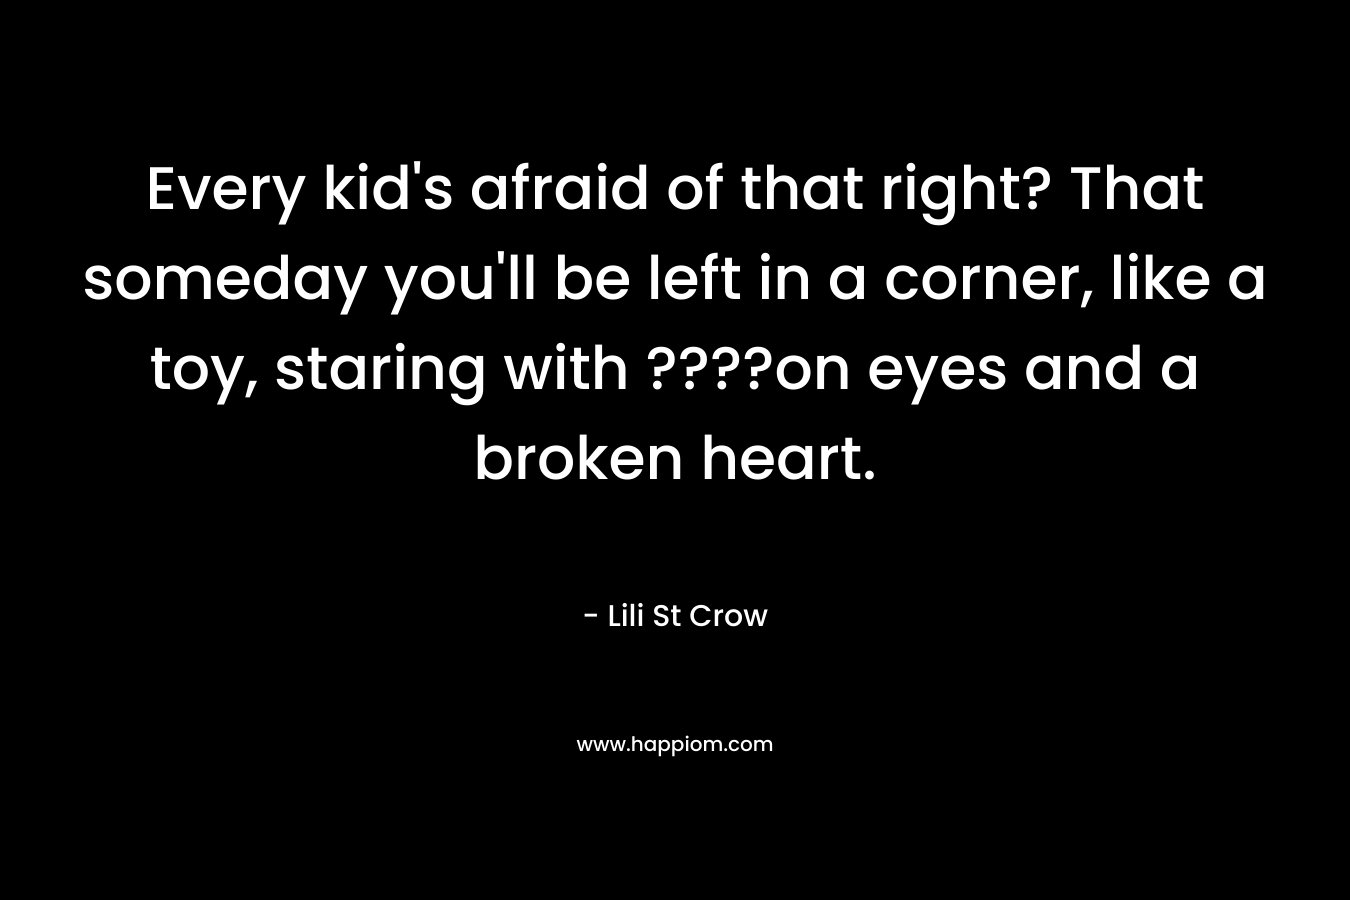 Every kid's afraid of that right? That someday you'll be left in a corner, like a toy, staring with ????on eyes and a broken heart.